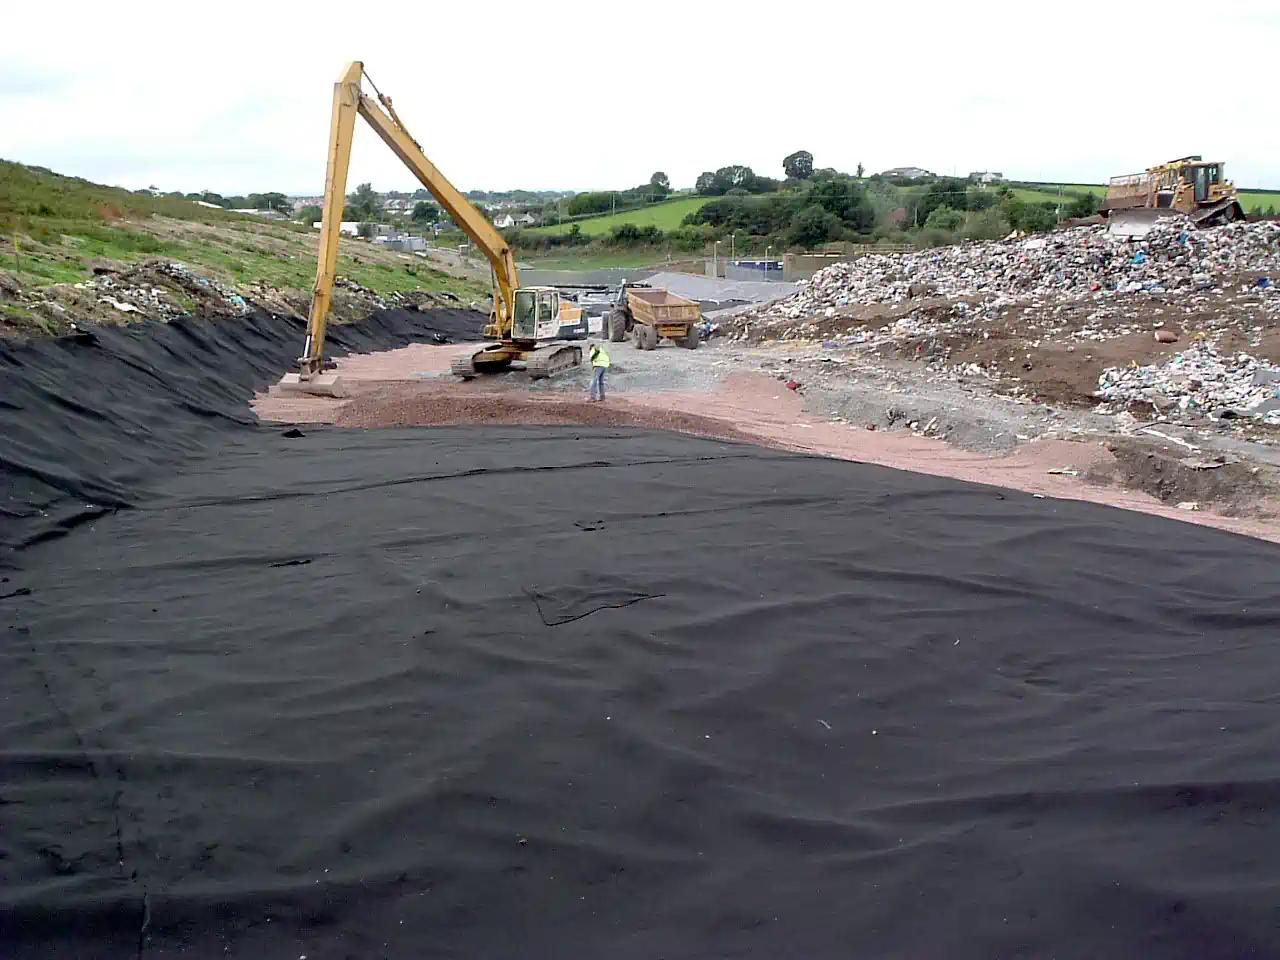 Landfill lining in progress on a landfill project designed by the consultant.